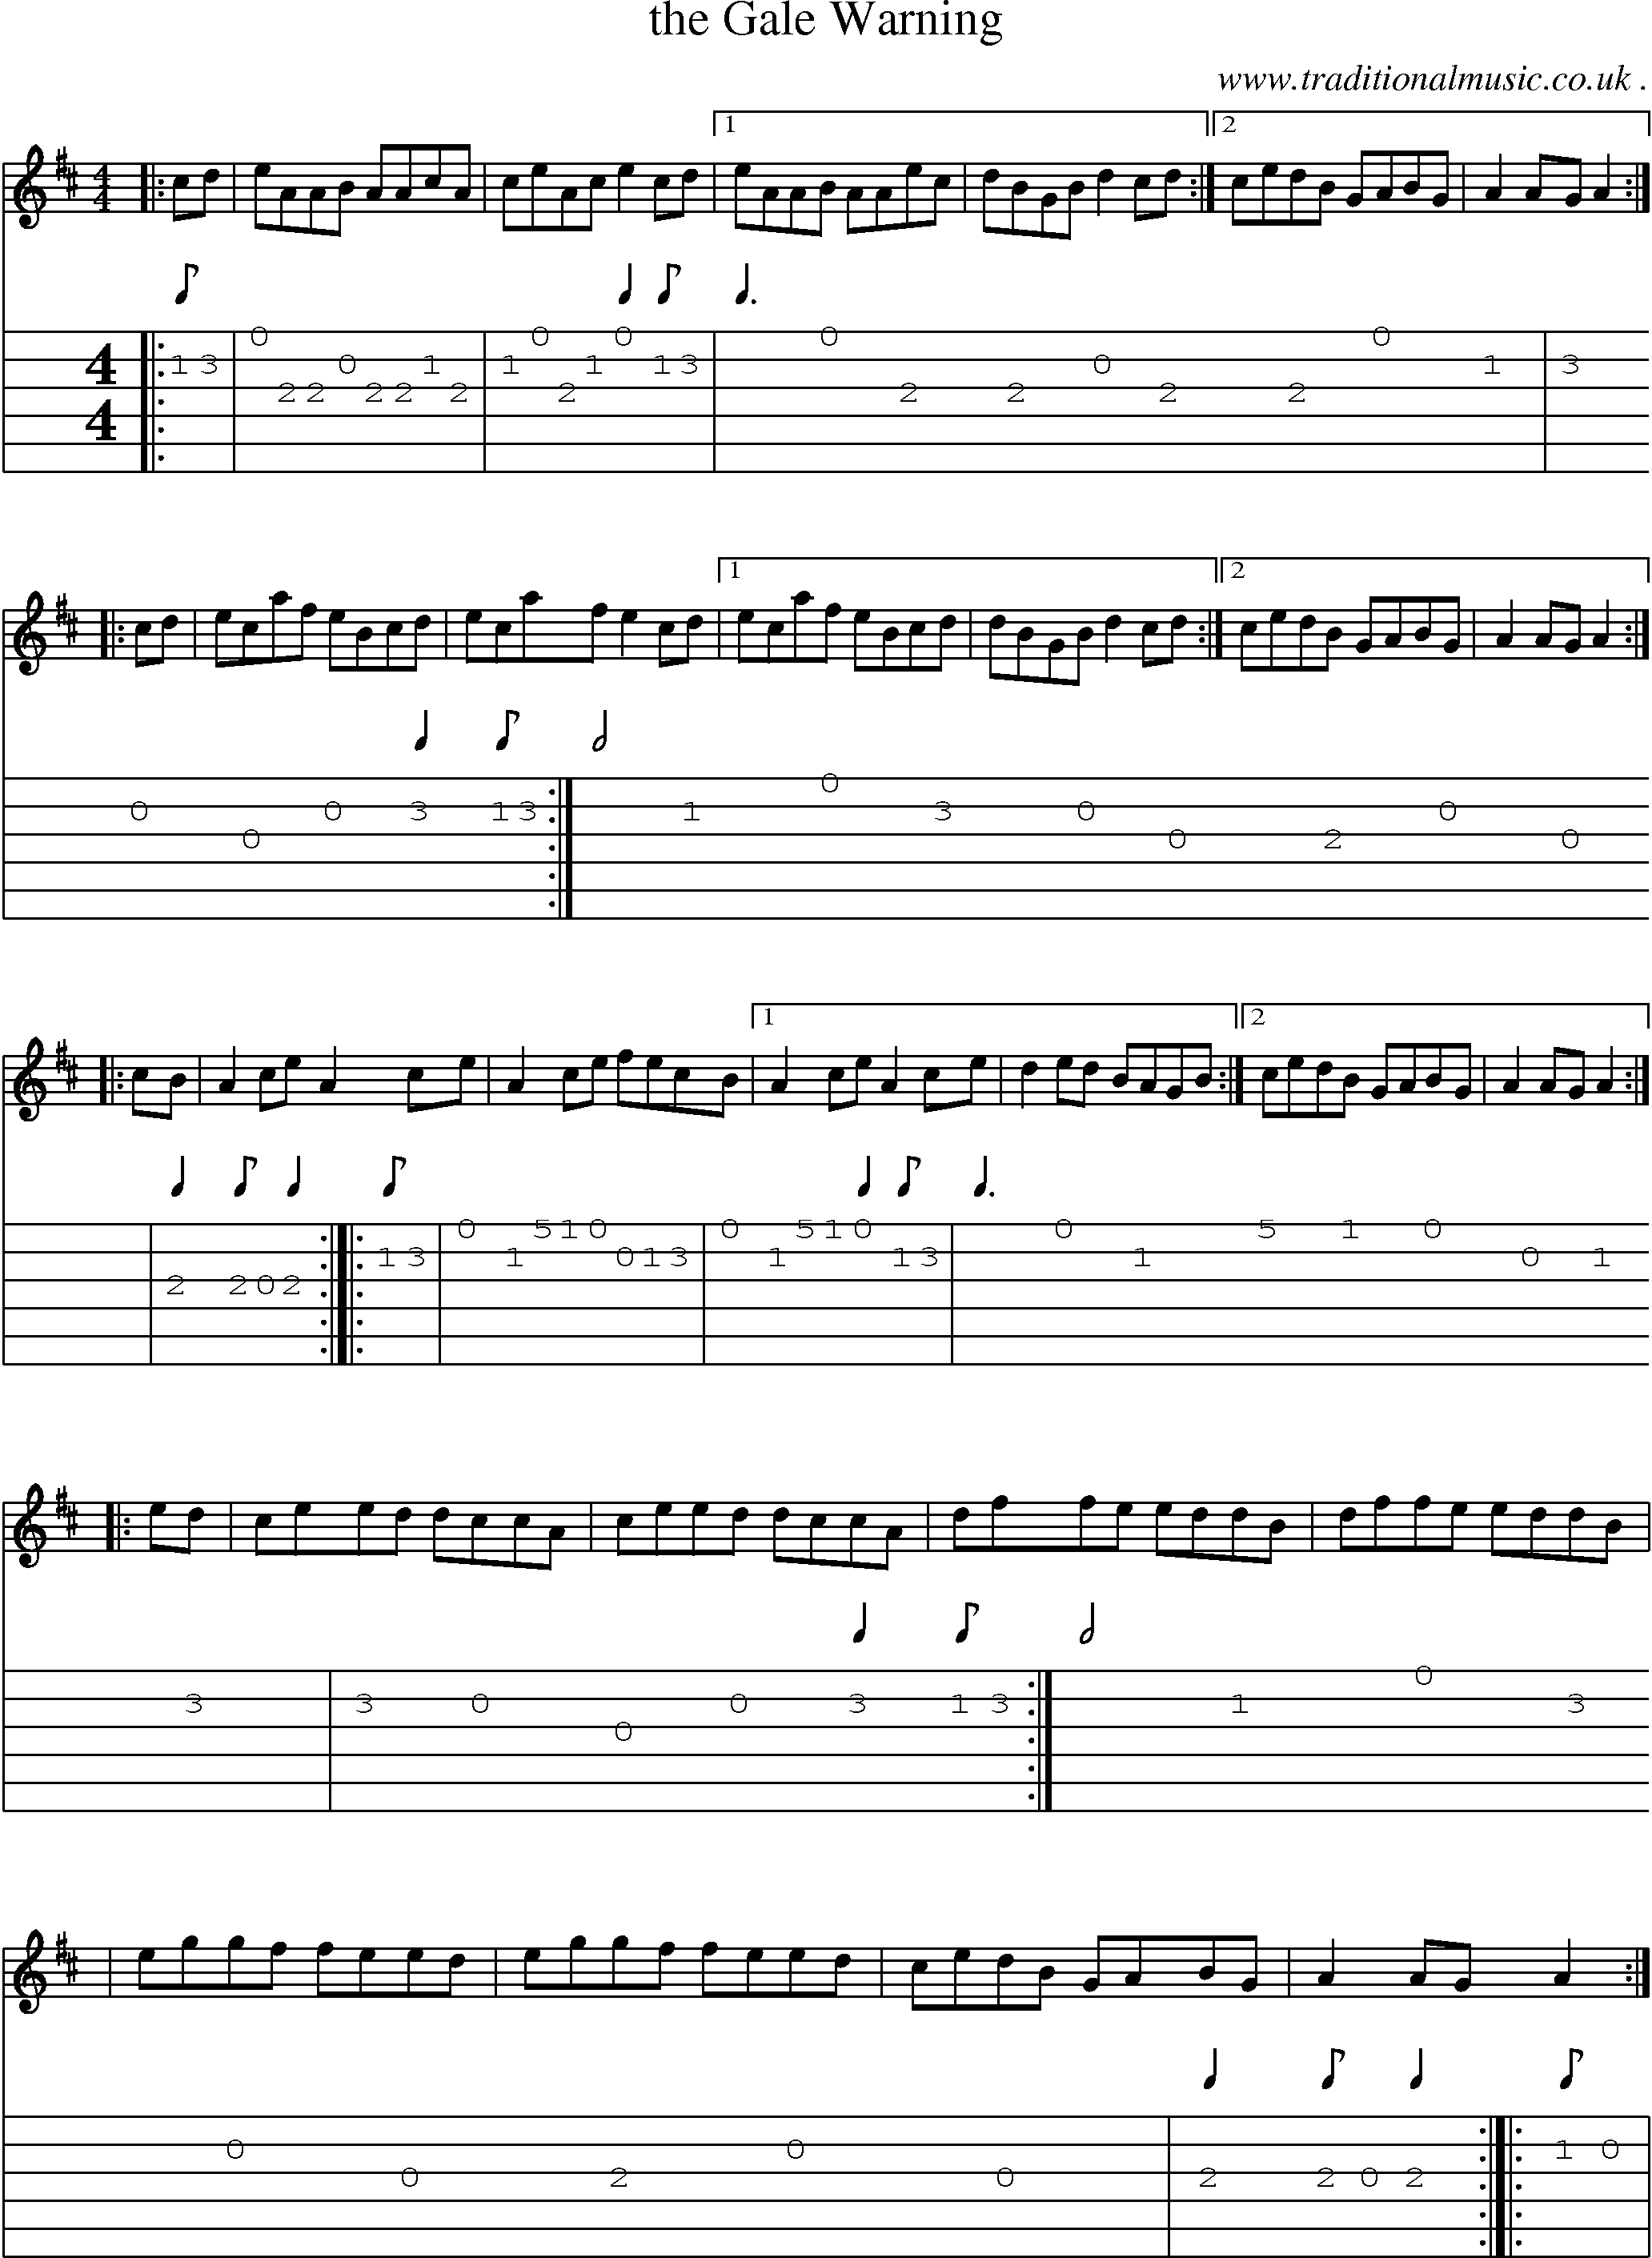 Sheet-music  score, Chords and Guitar Tabs for The Gale Warning